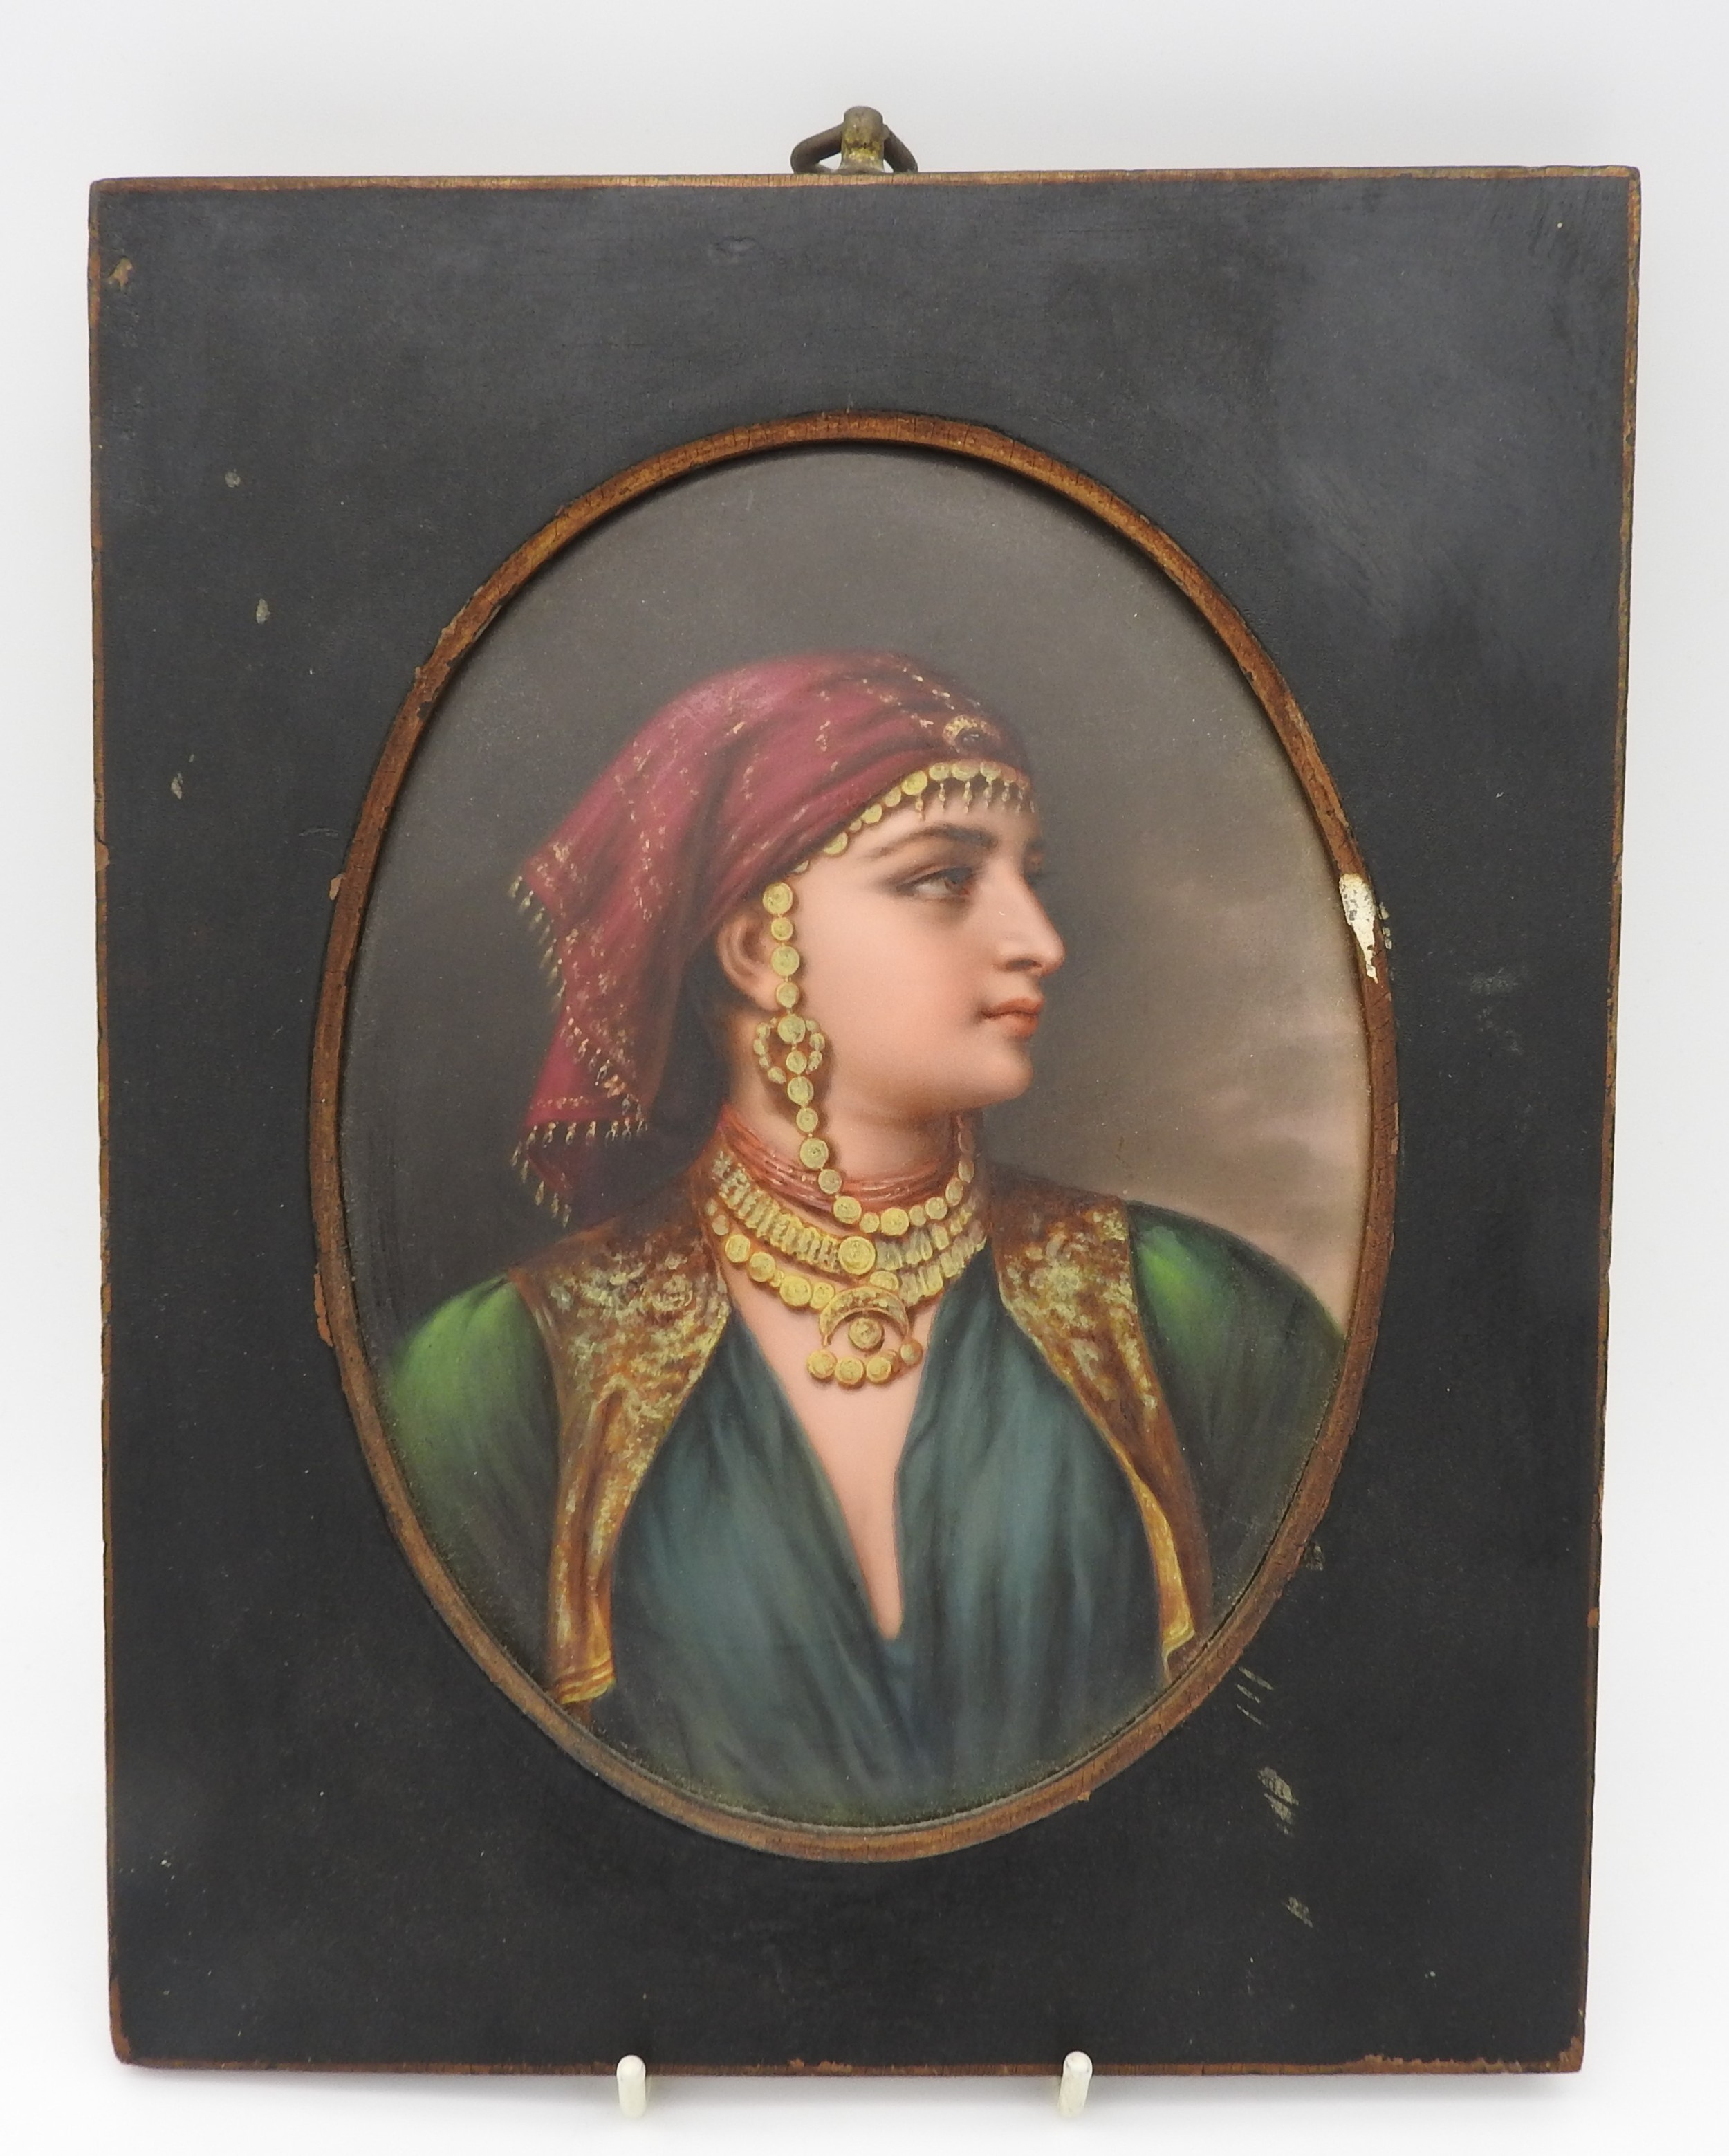 A CONTINENTAL PAINTED OVAL PORCELAIN PLAQUE, LATE 19TH CENTURY, depicting portrait bust of gypsy